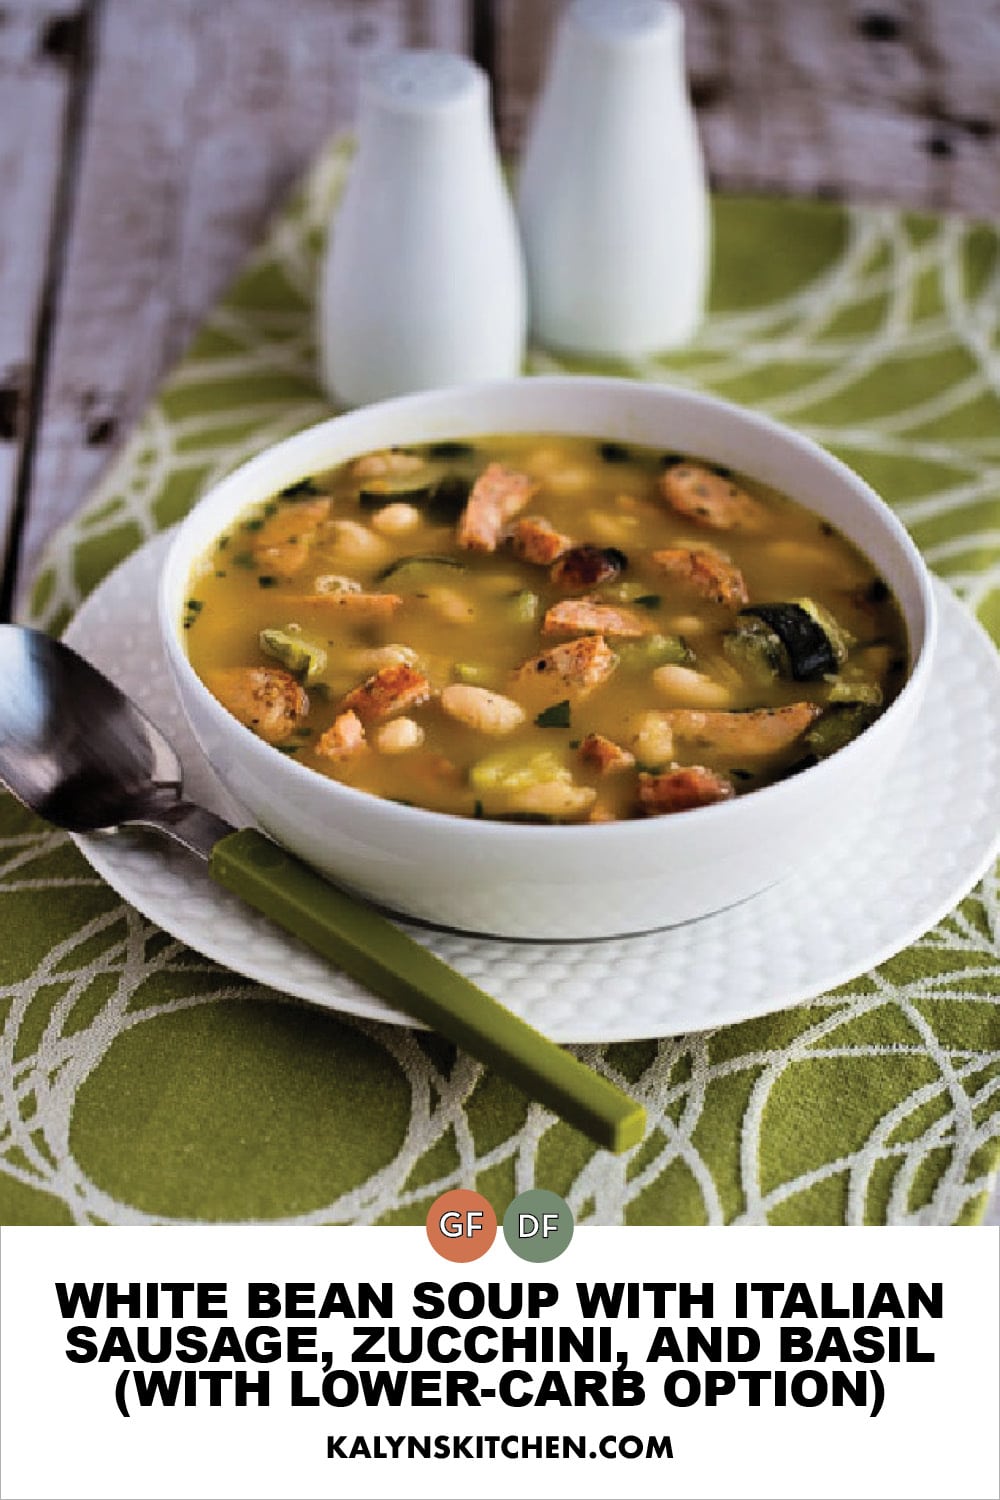 Pinterest image of White Bean Soup with Italian Sausage, Zucchini, and Basil